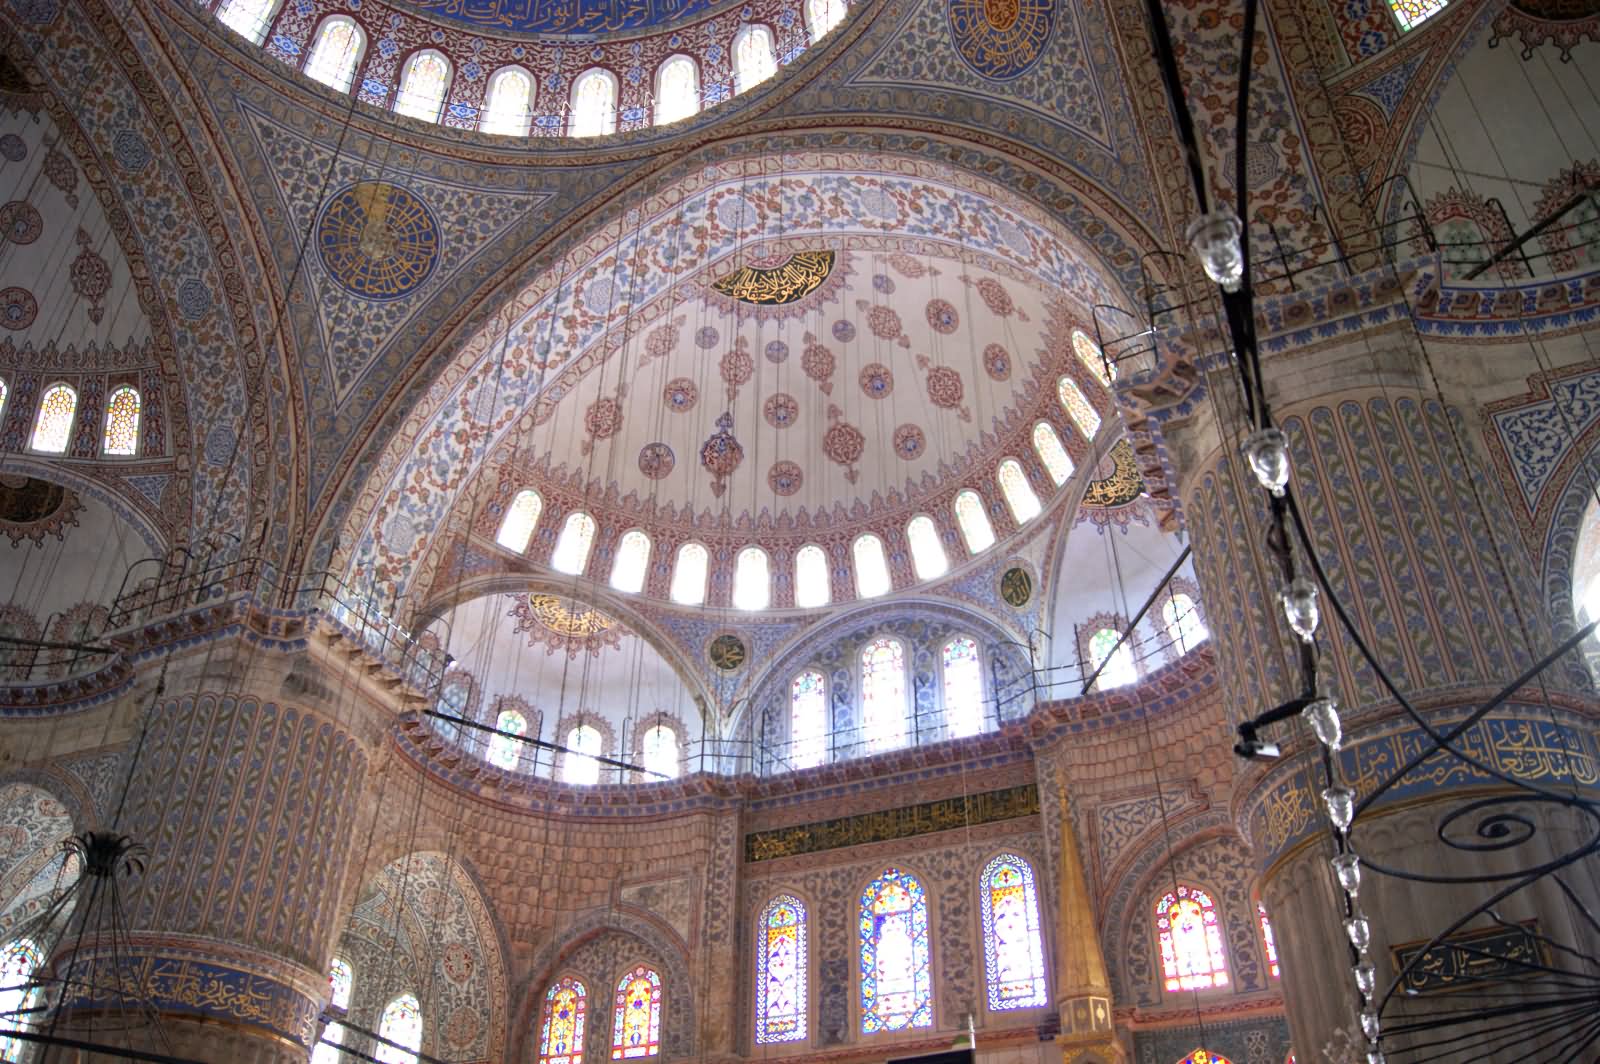 The Domes Inside The Blue Mosque With Colorful Patterns